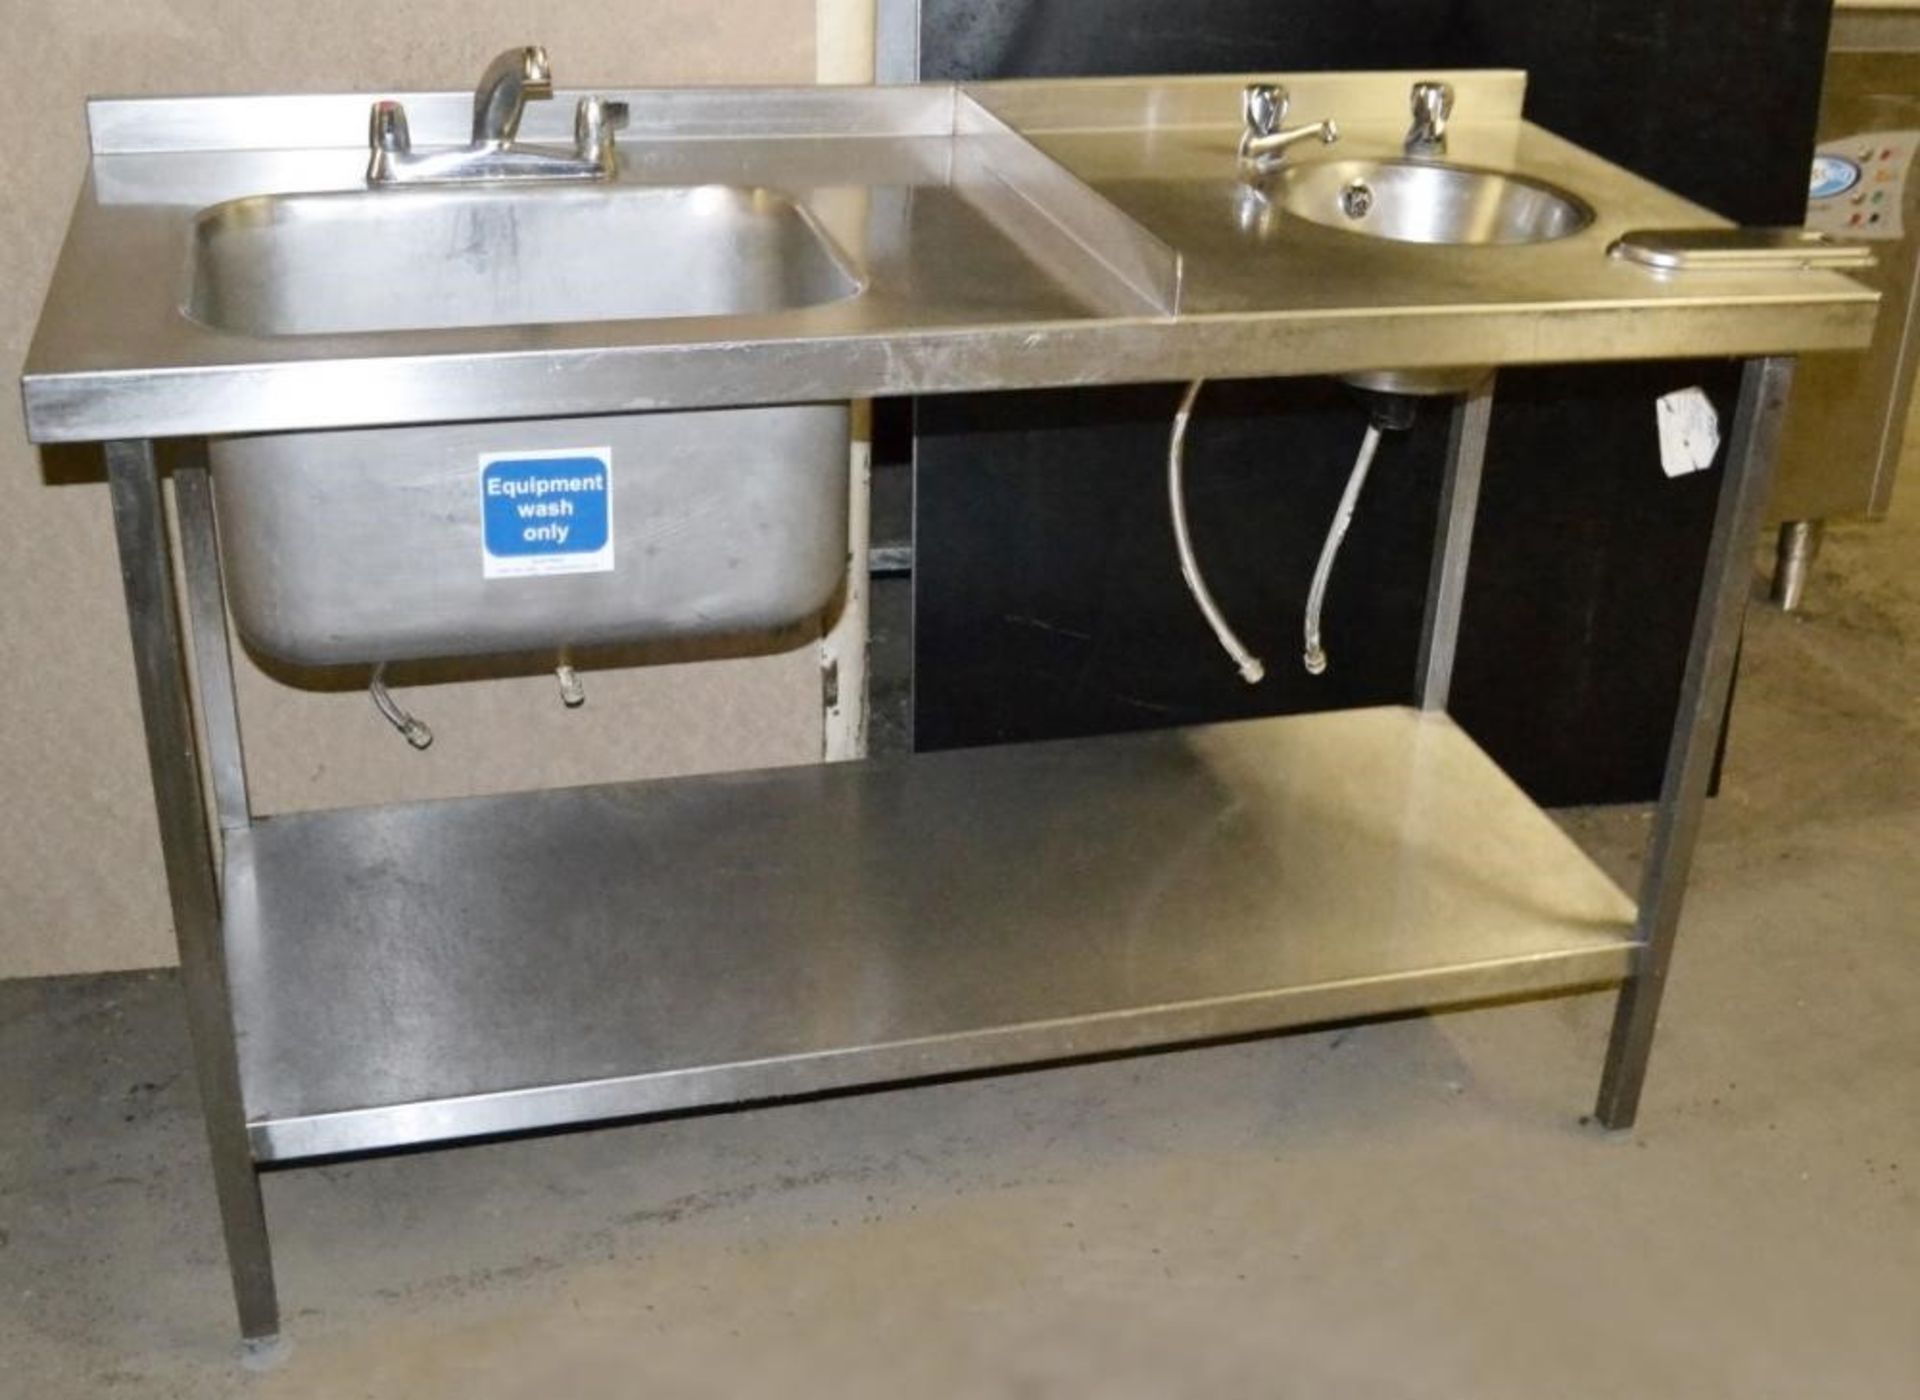 1 x Commercial Stainless Steel Double Sink Unit With Mixer Tap, Spillage Lip, Splashback and Undersh